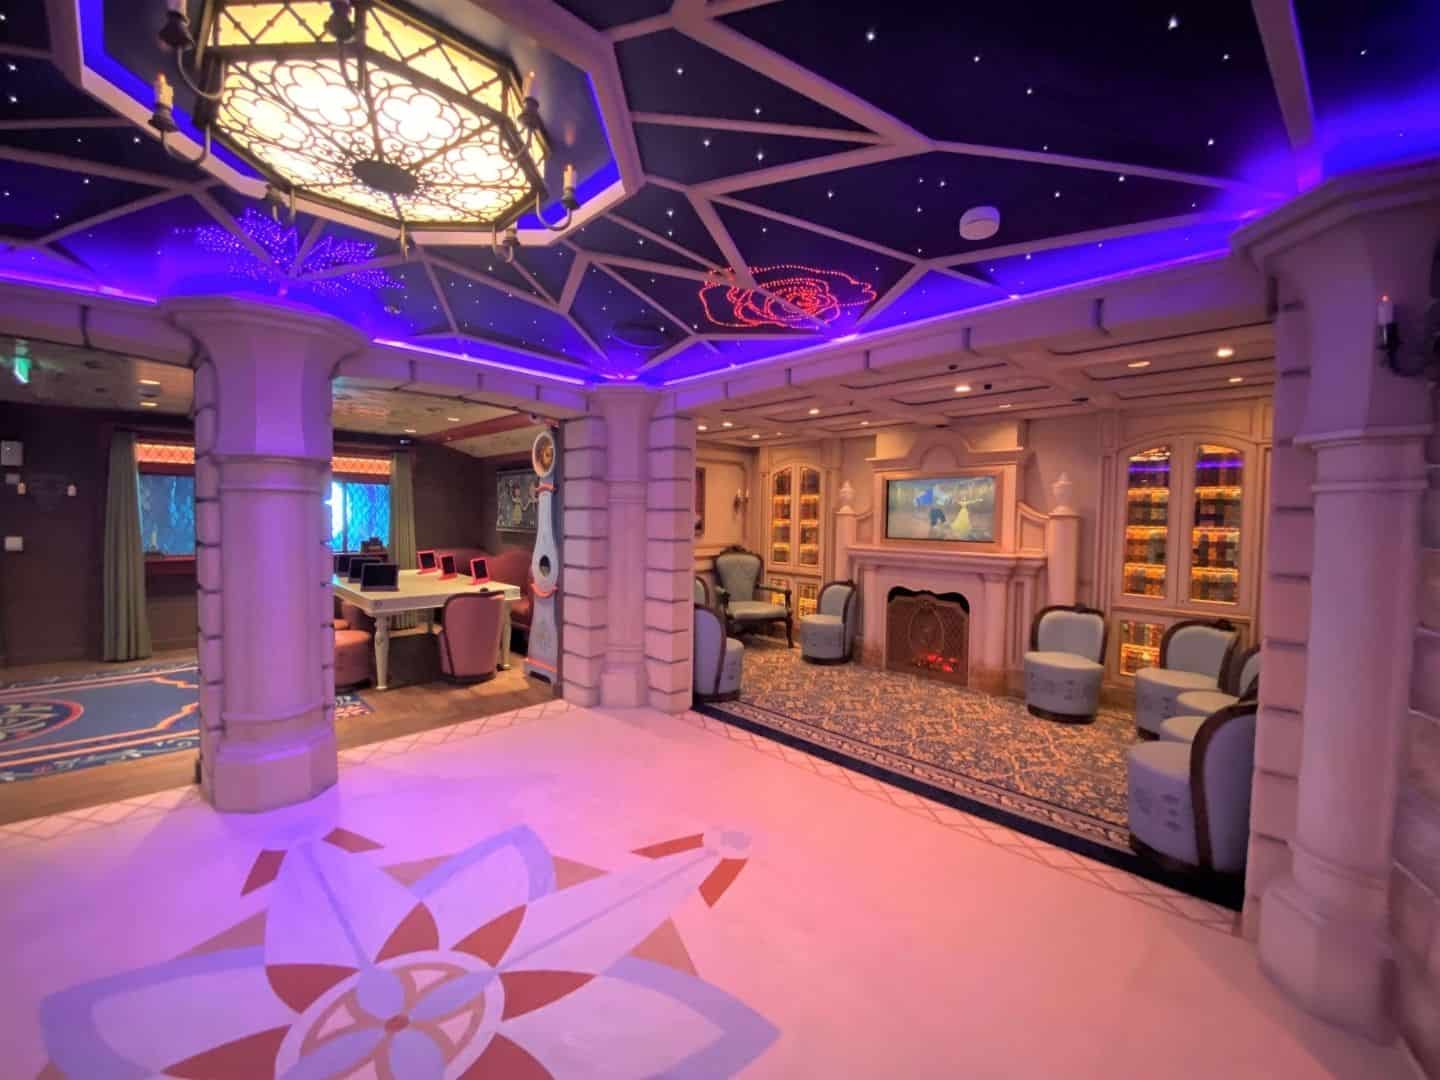 Beauty and the Beast and Frozen themed rooms at Fairy Tale Hall Oceaneer Club Disney Wish